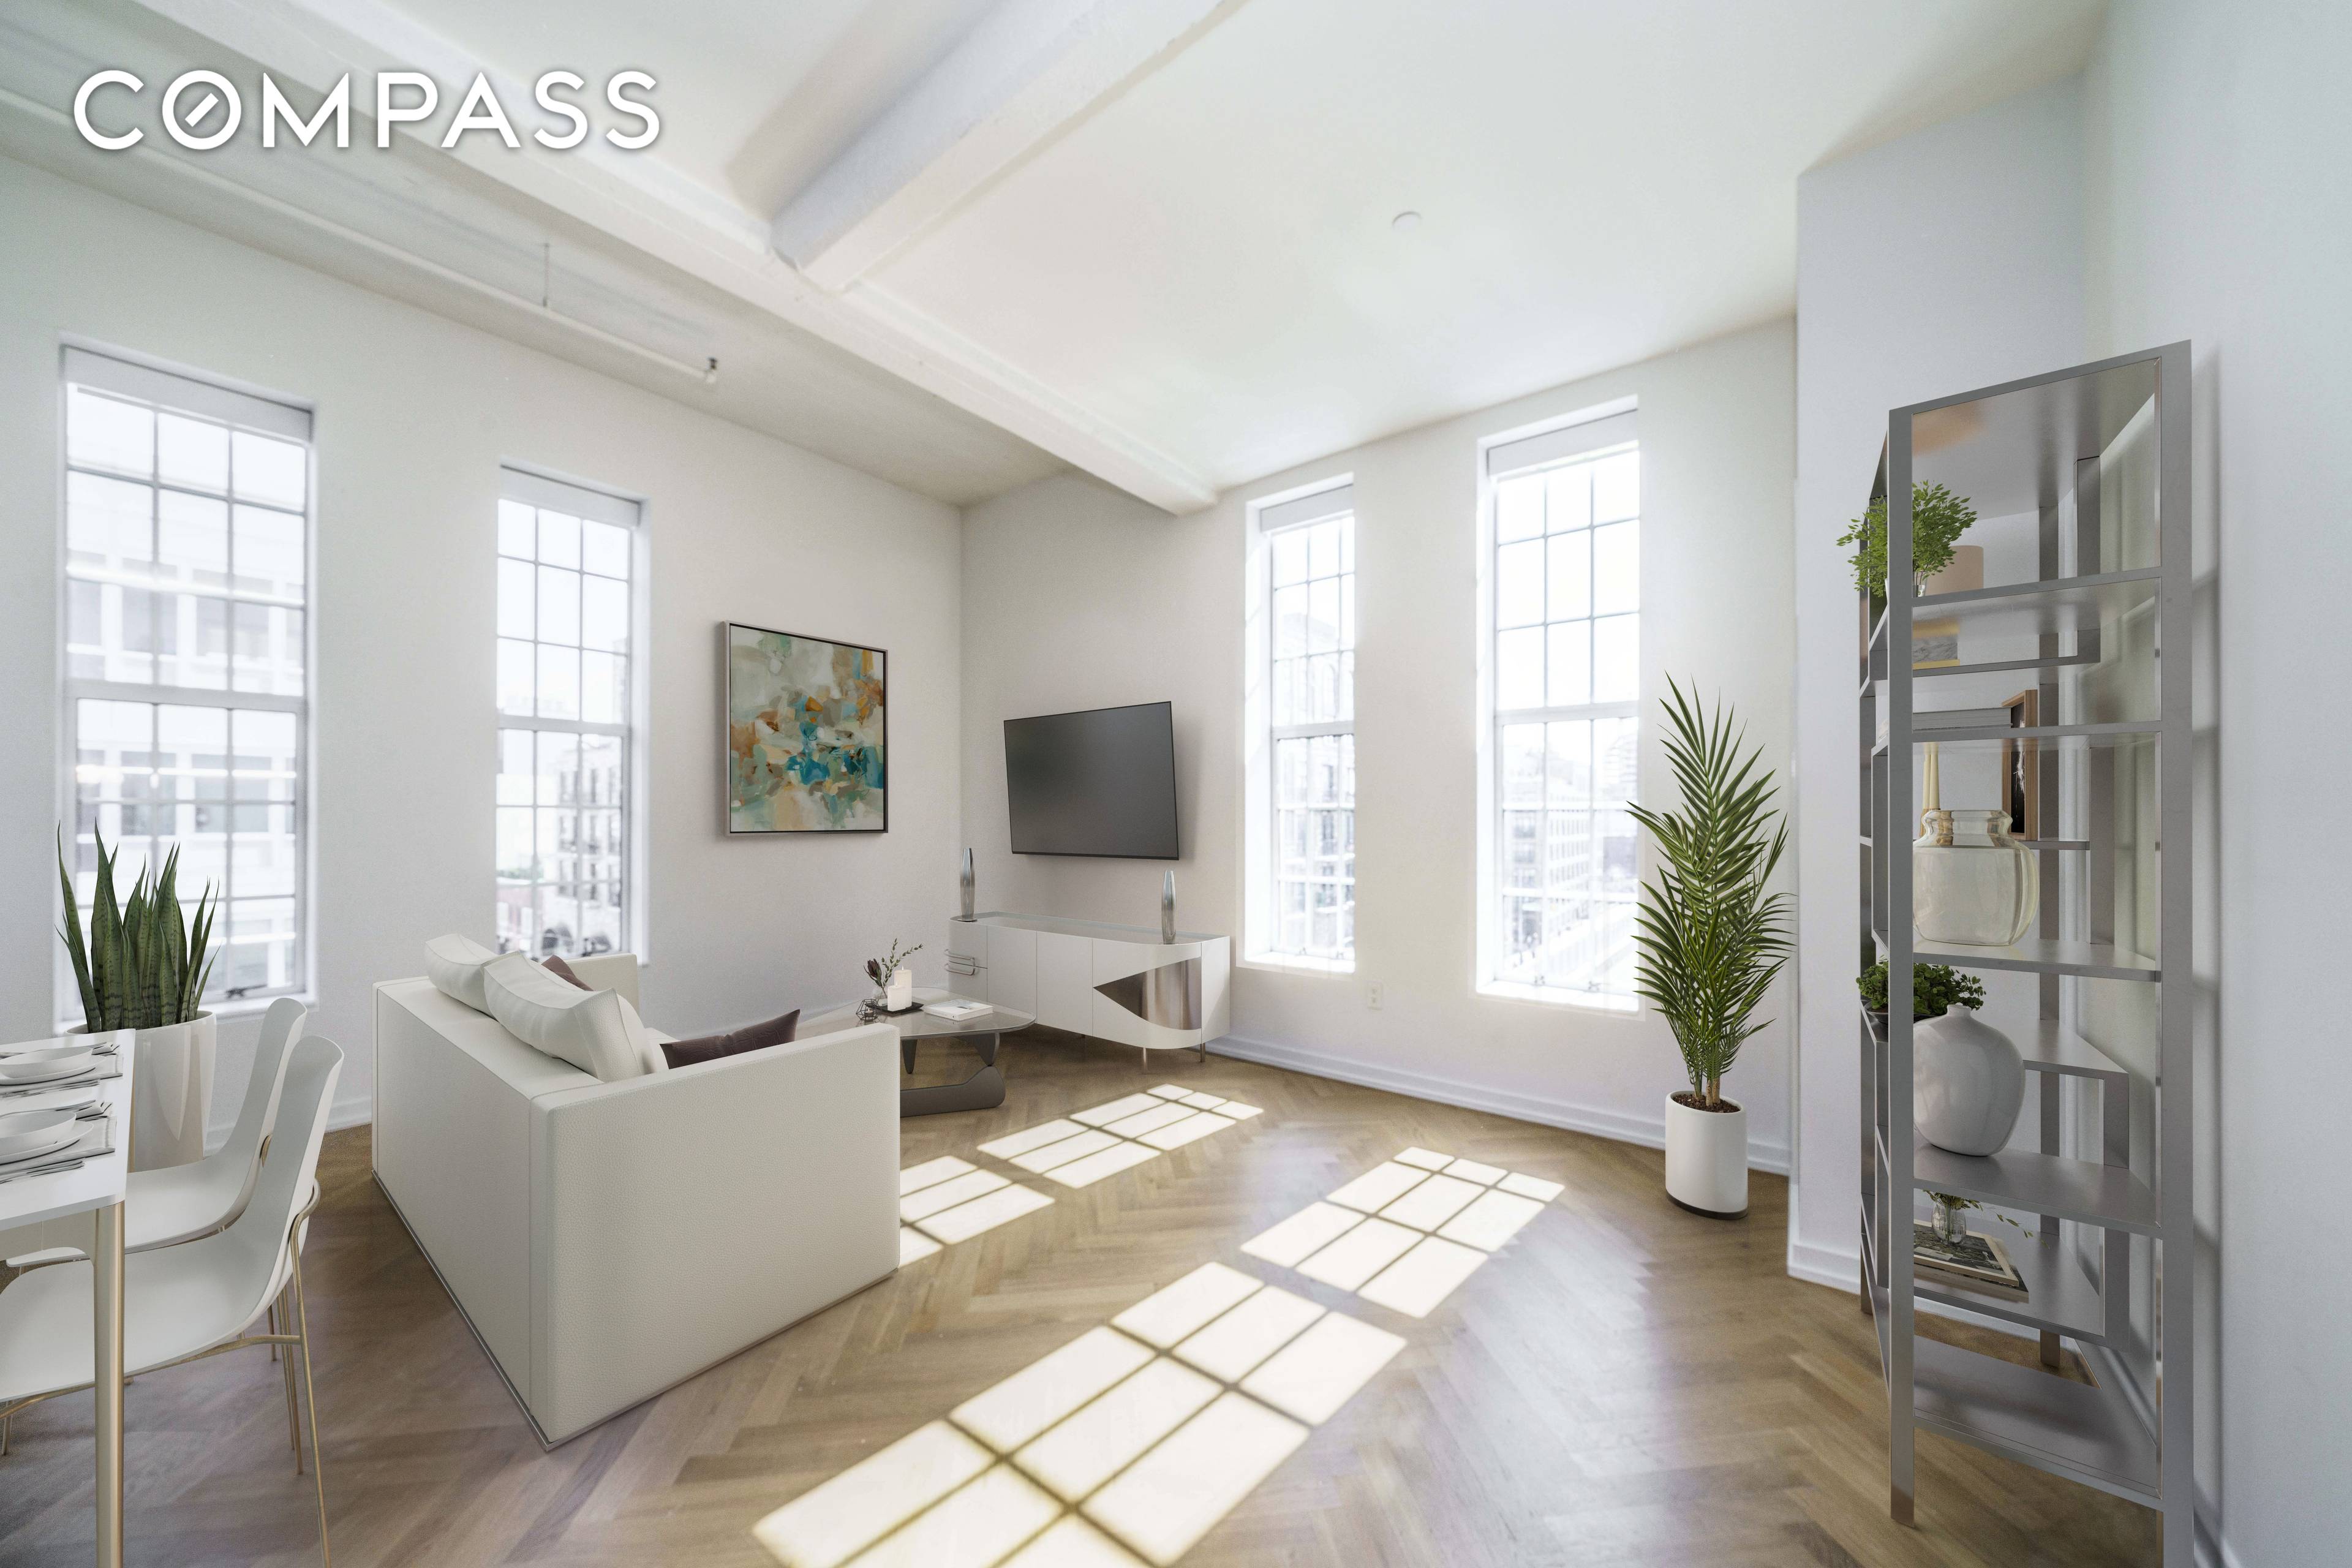 Welcome to The Austin Nichols House, a luxurious waterfront condominium in the heart of Williamsburg.